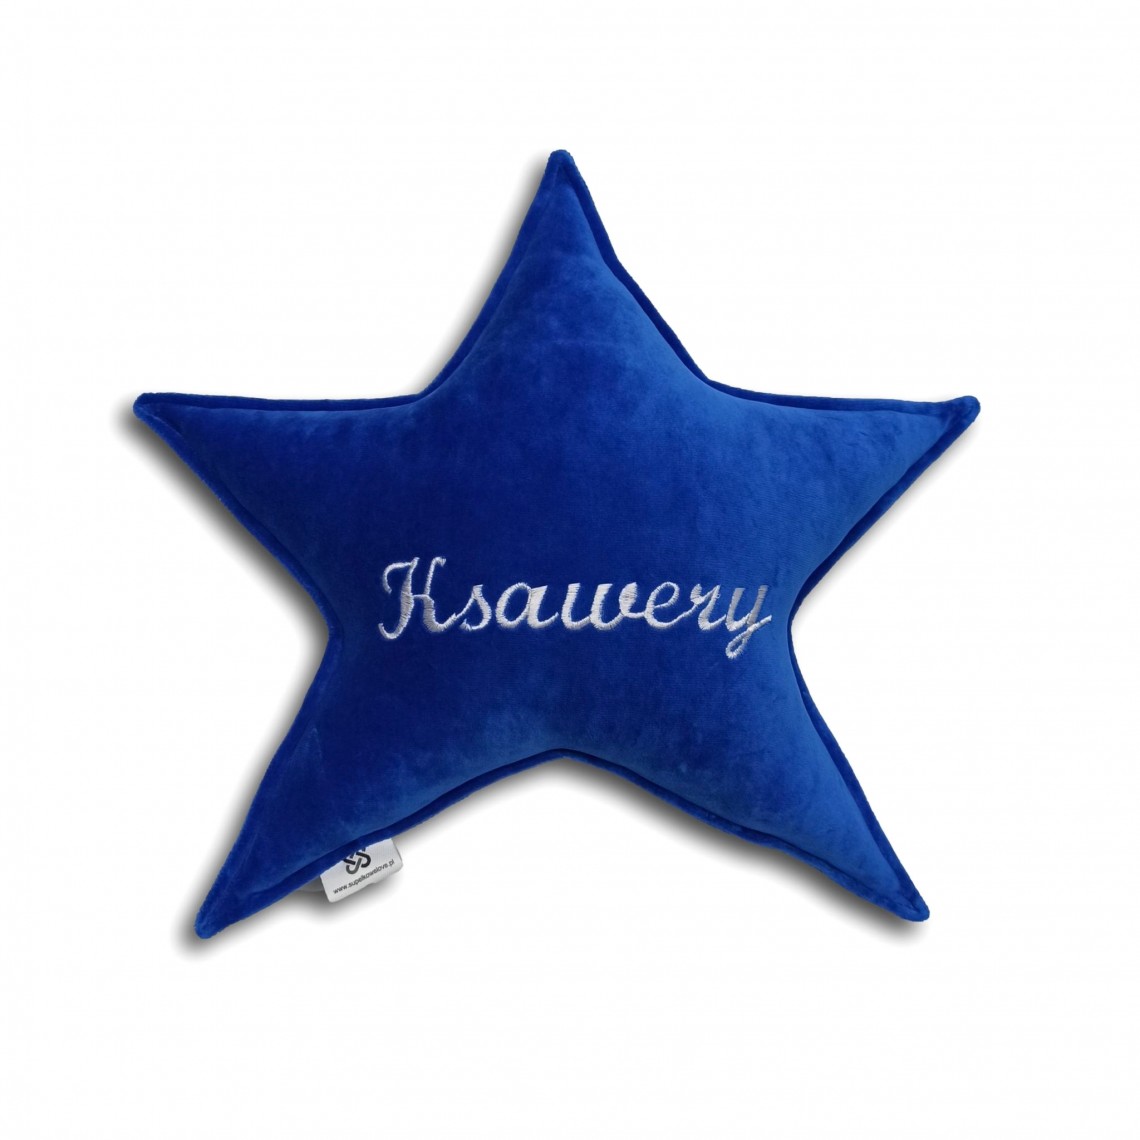 Velor Pillow Star with name